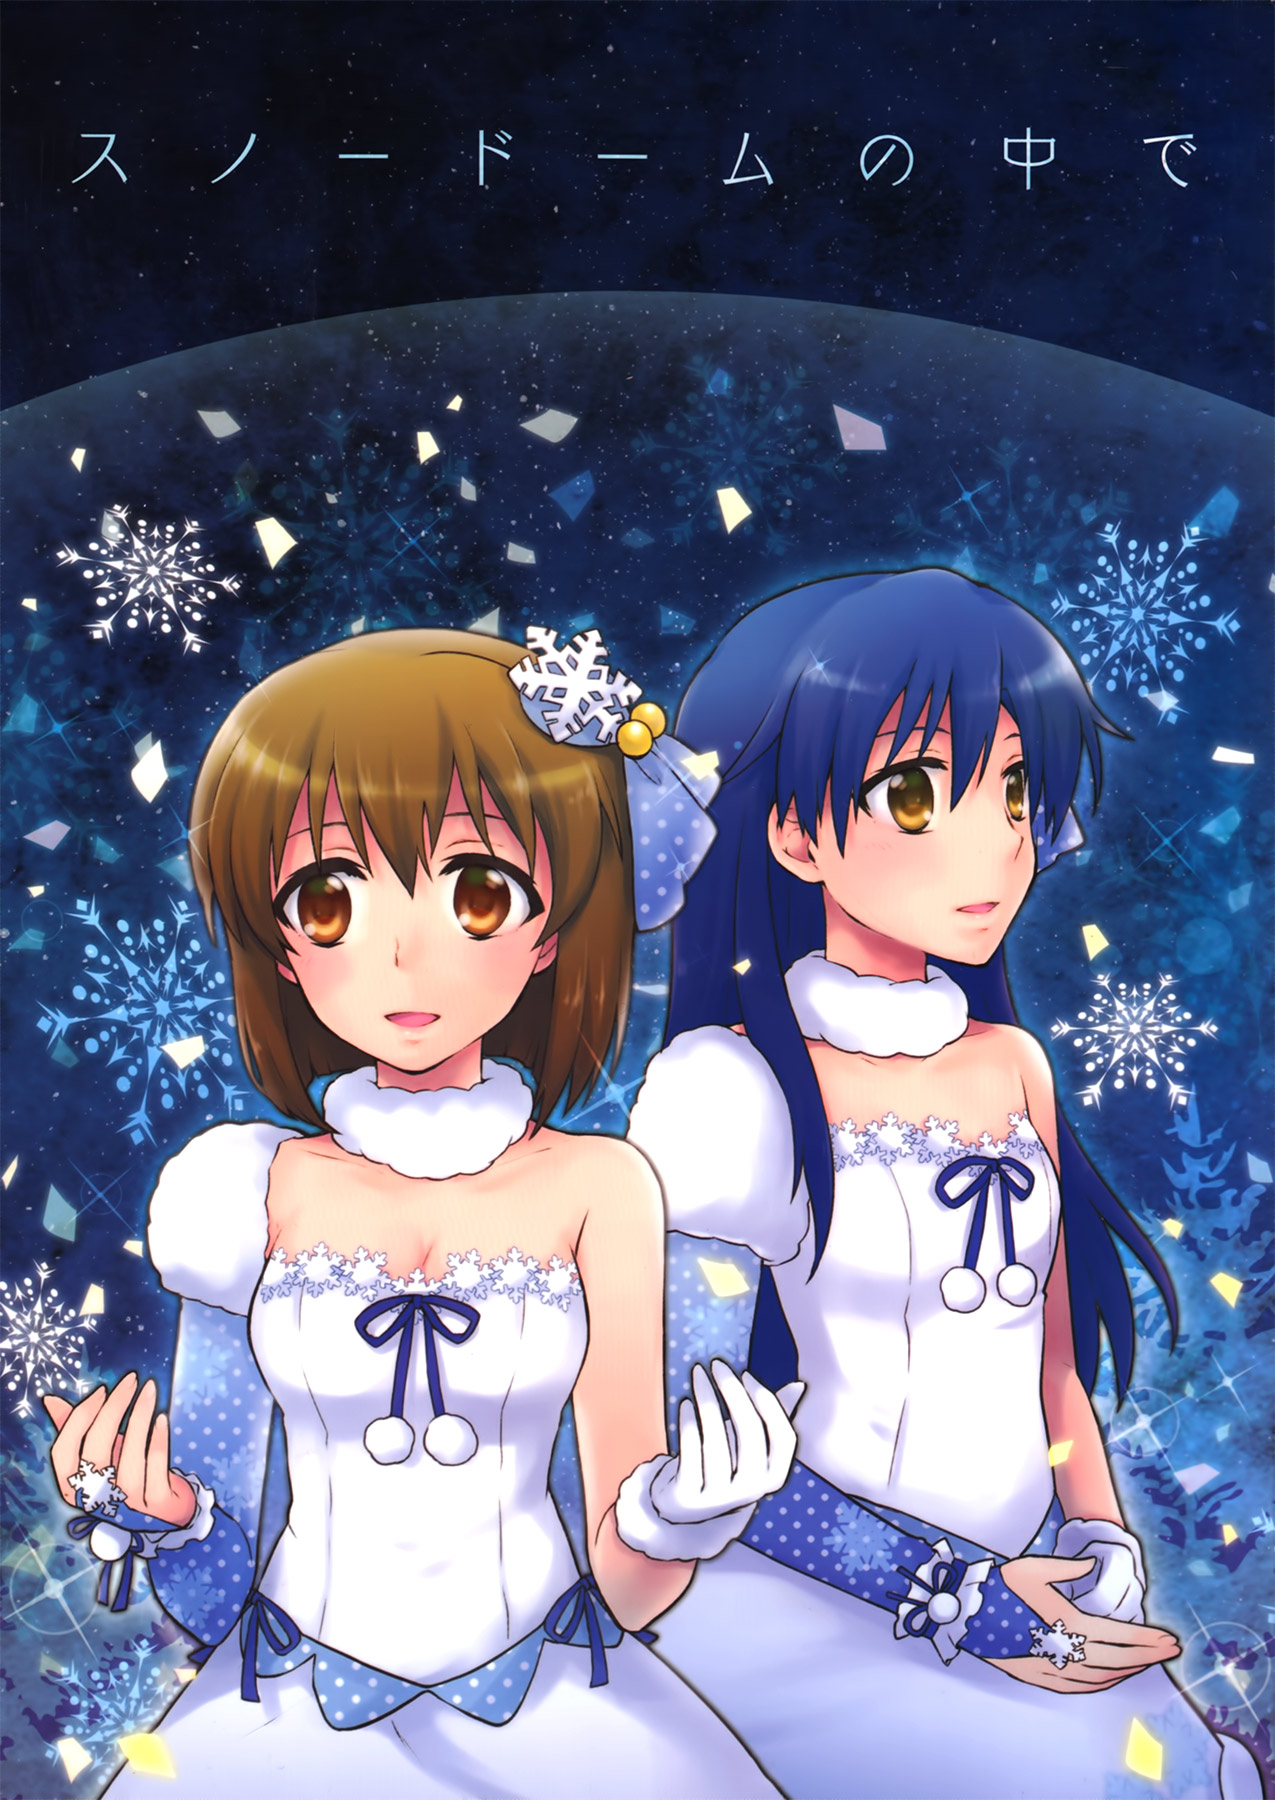 THE iDOLM@STER - Inside the Snow Dome (Doujinshi) - MangaDex